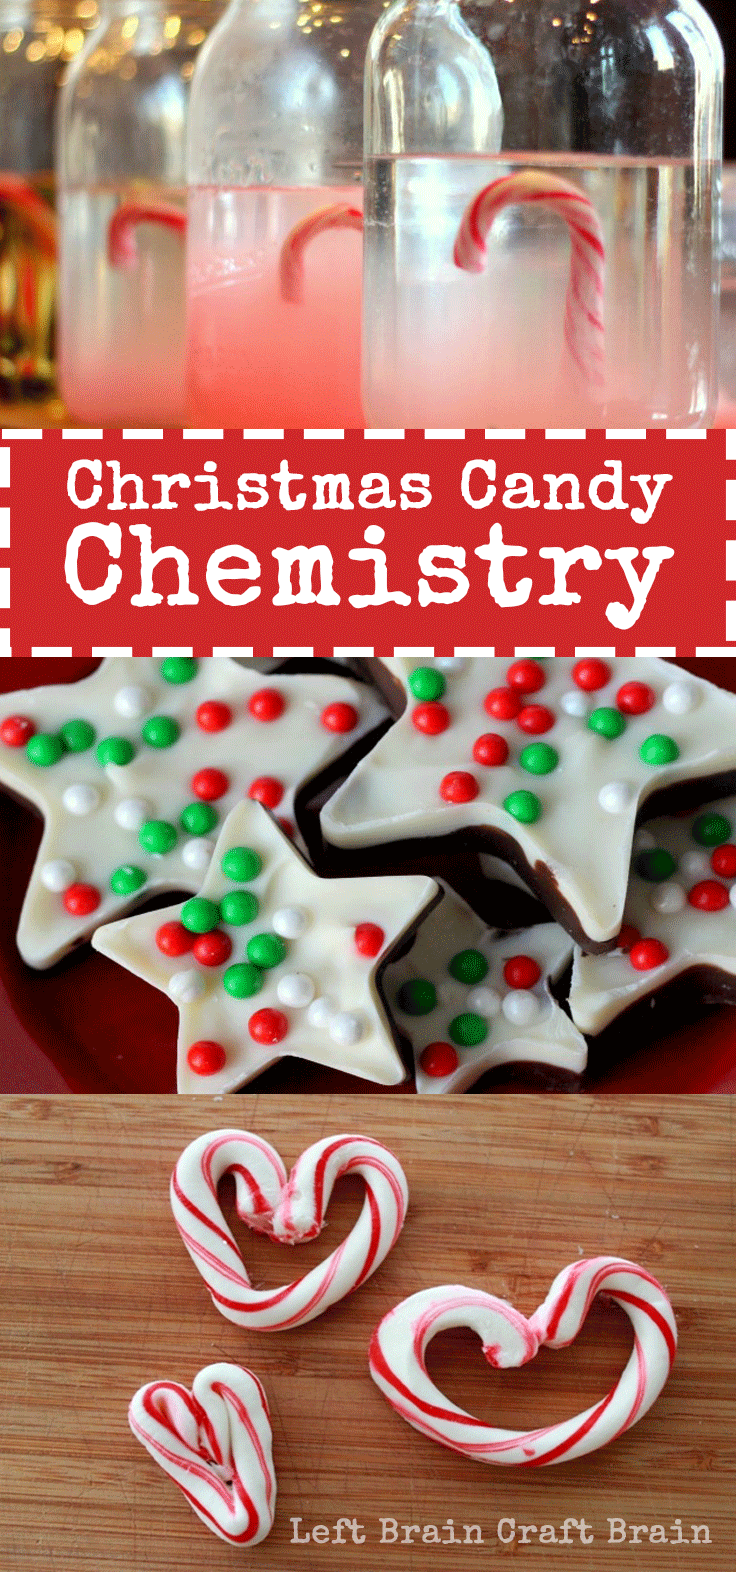 Have some science fun with all that yummy Christmas candy. Christmas Candy Chemistry is STEM learning made fun and festive.